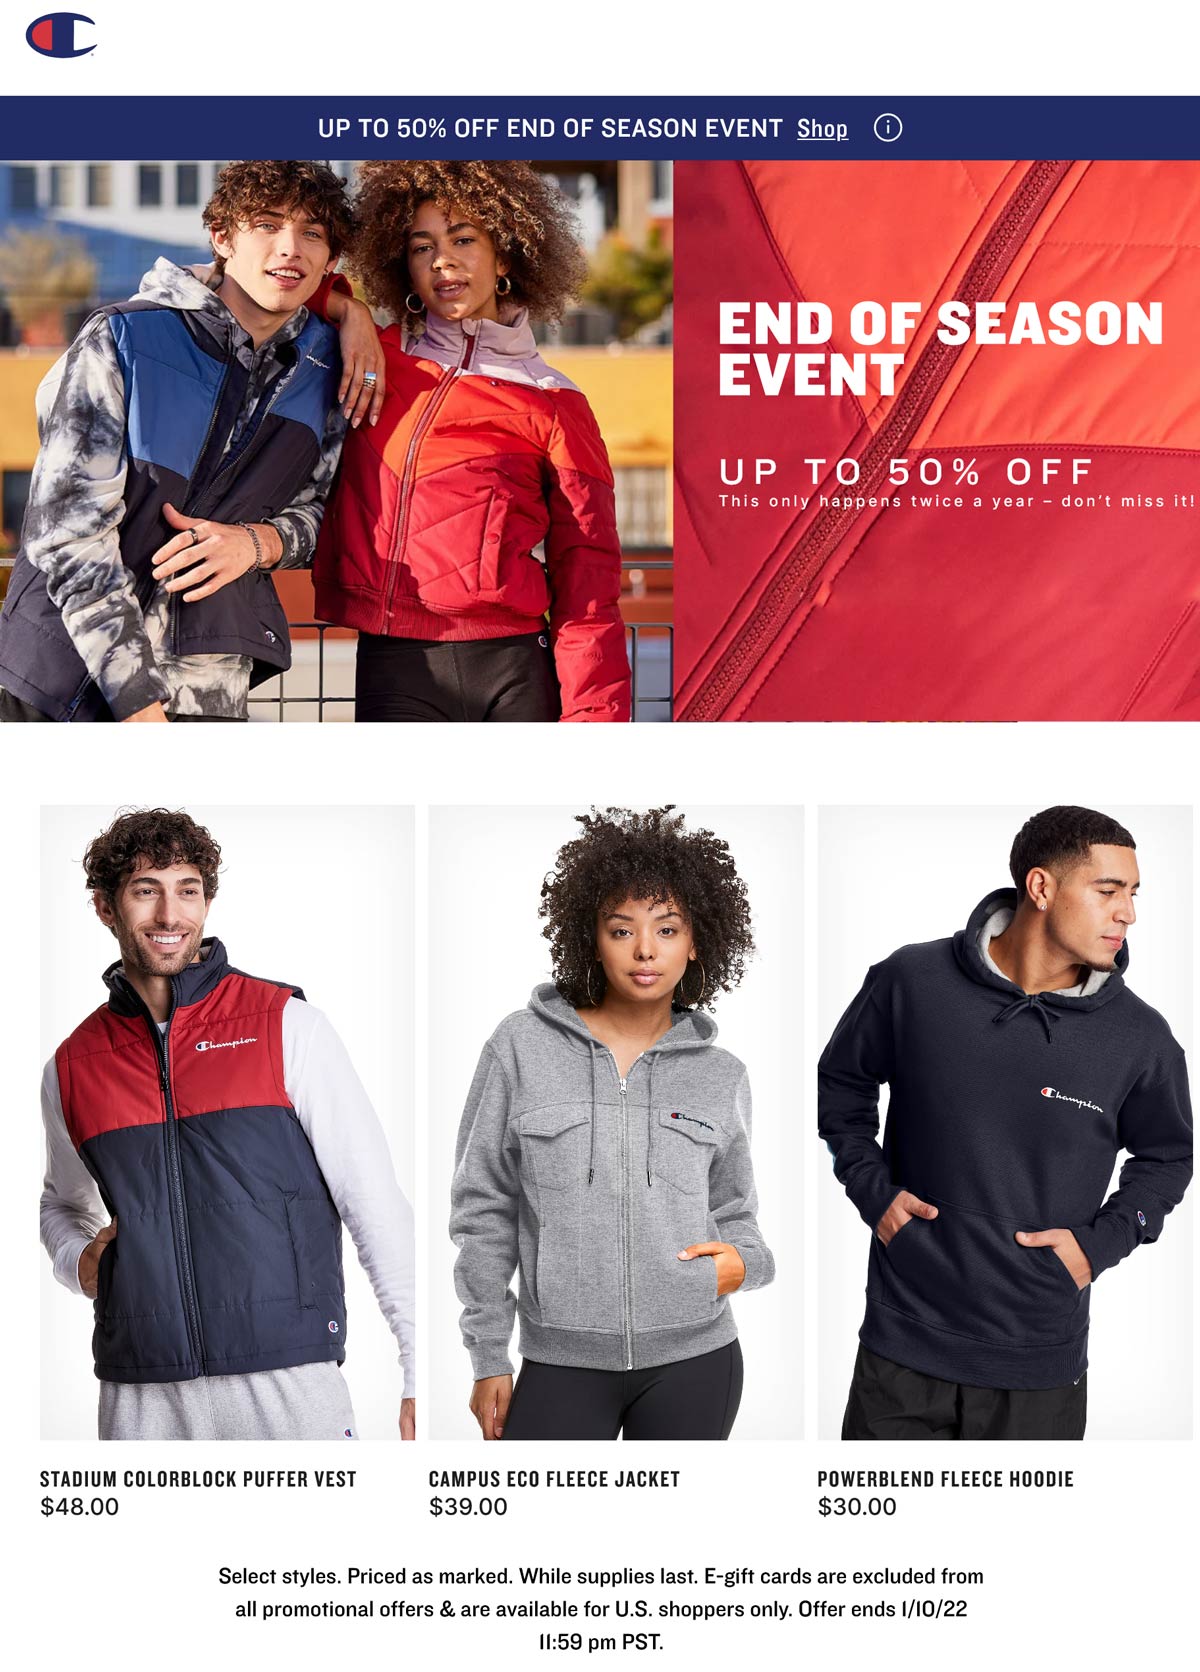 Champion coupons & promo code for [December 2022]